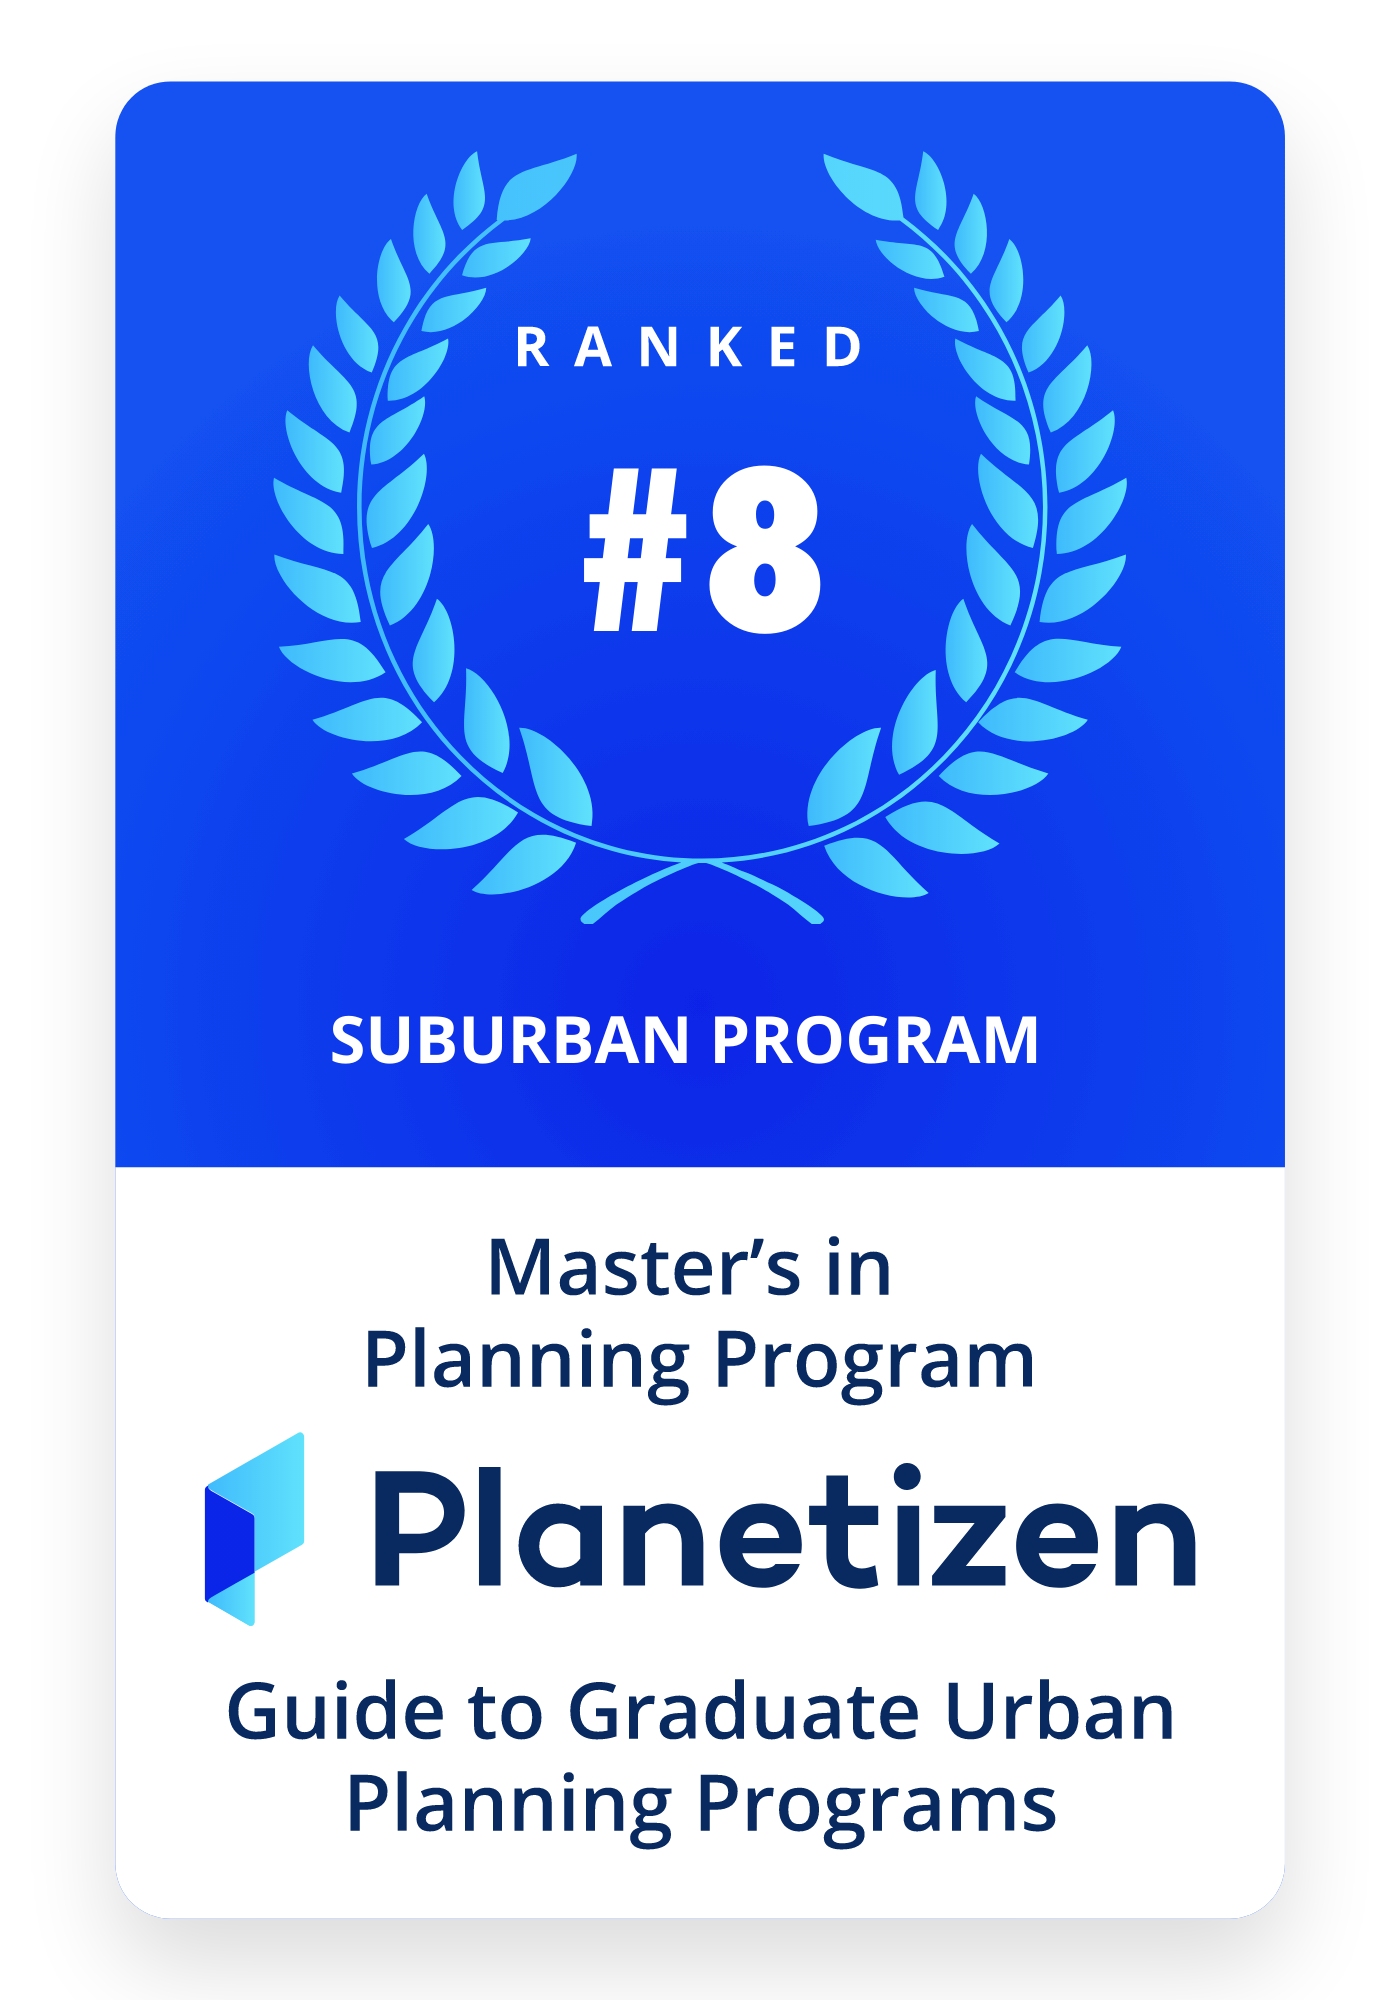 Ranked 8 from Planetizen Guide to Graduate Urban Planning Programs